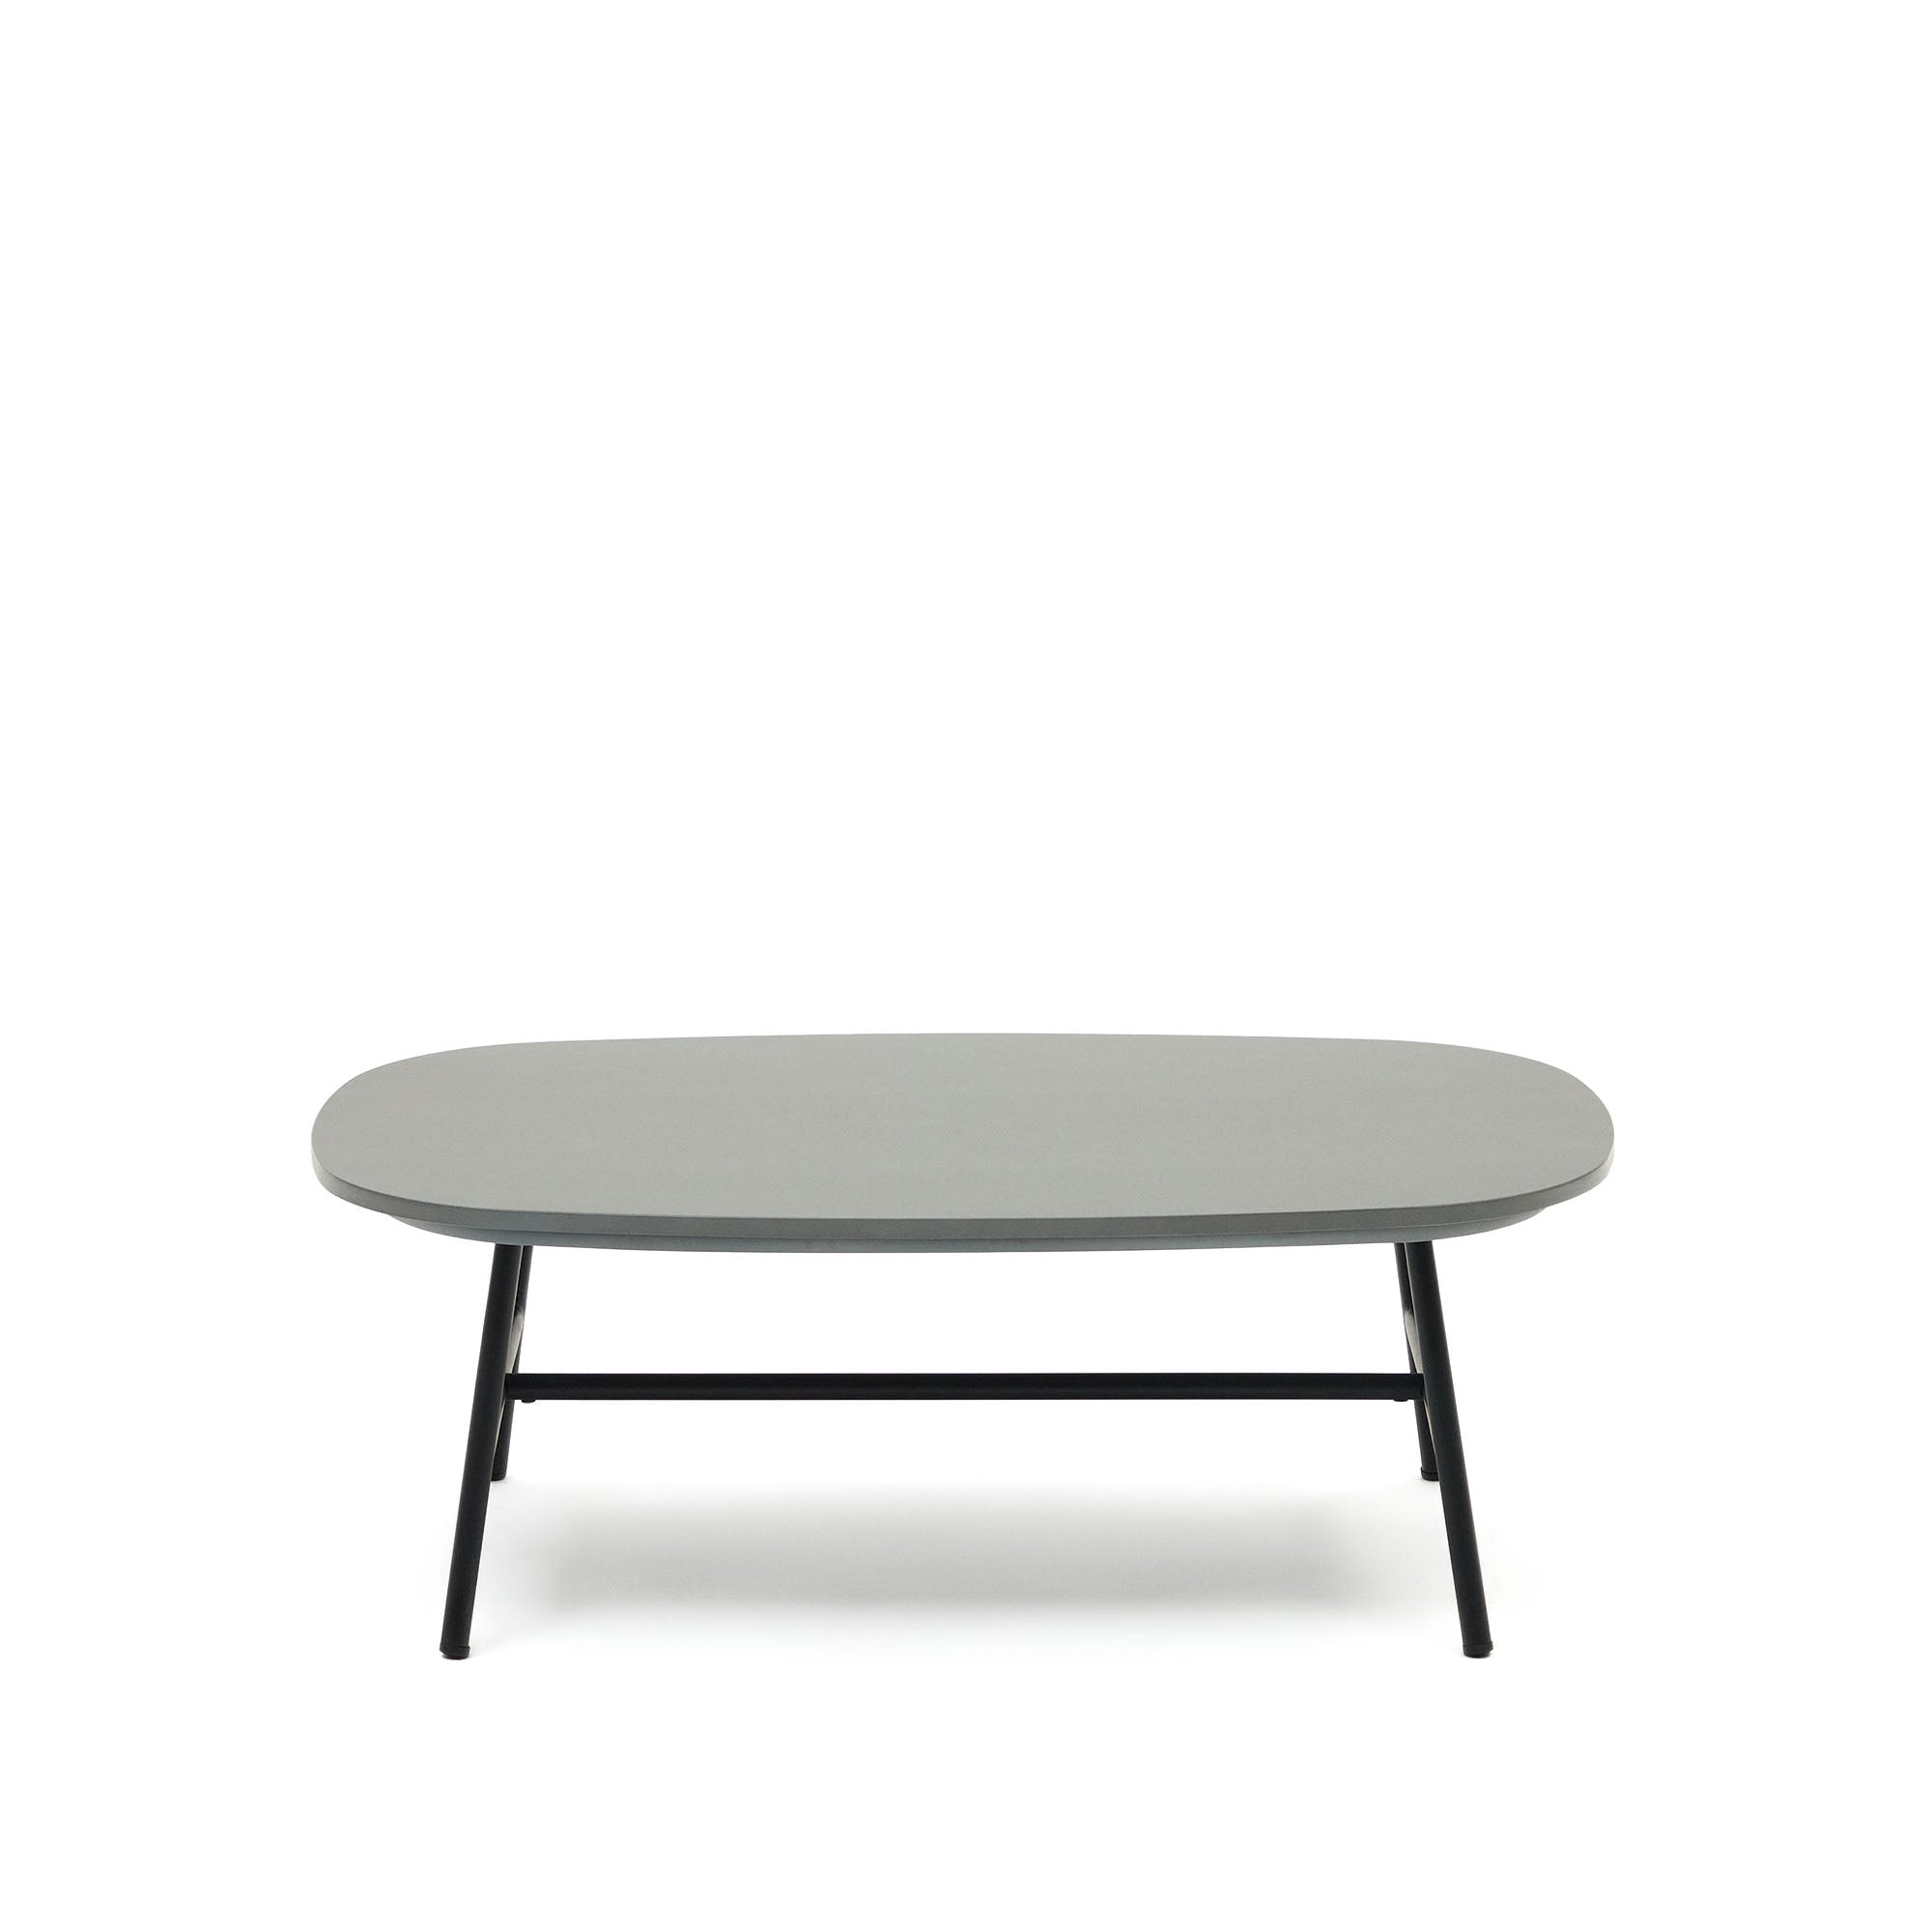 Bramant steel coffee table with black finish, 100 x 60 cm